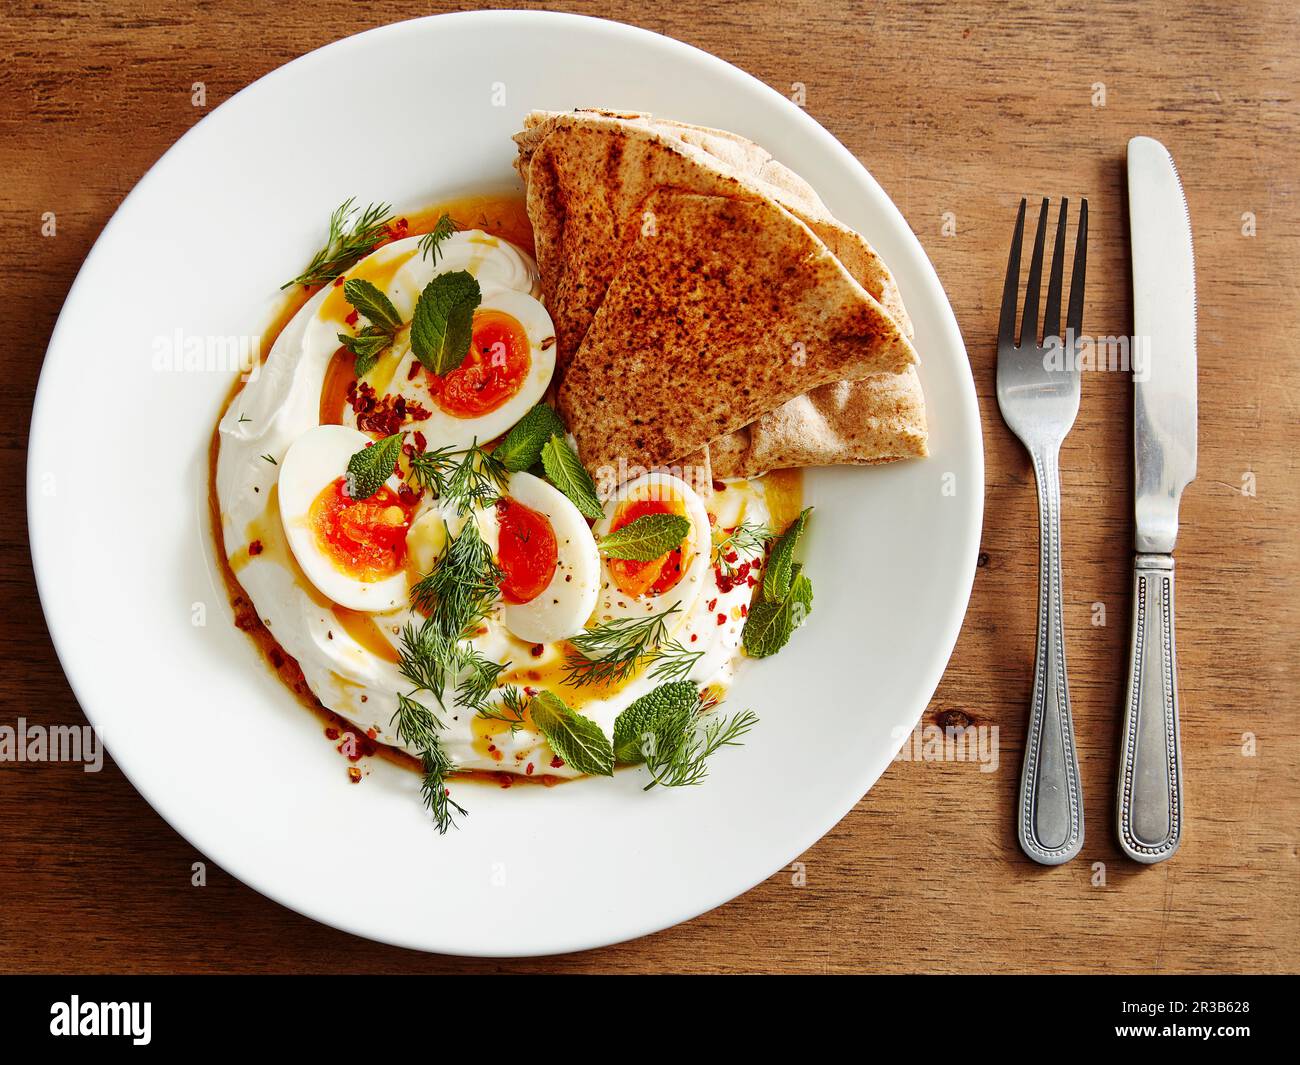 Hummus with eggs, herbs and flatbread Stock Photo